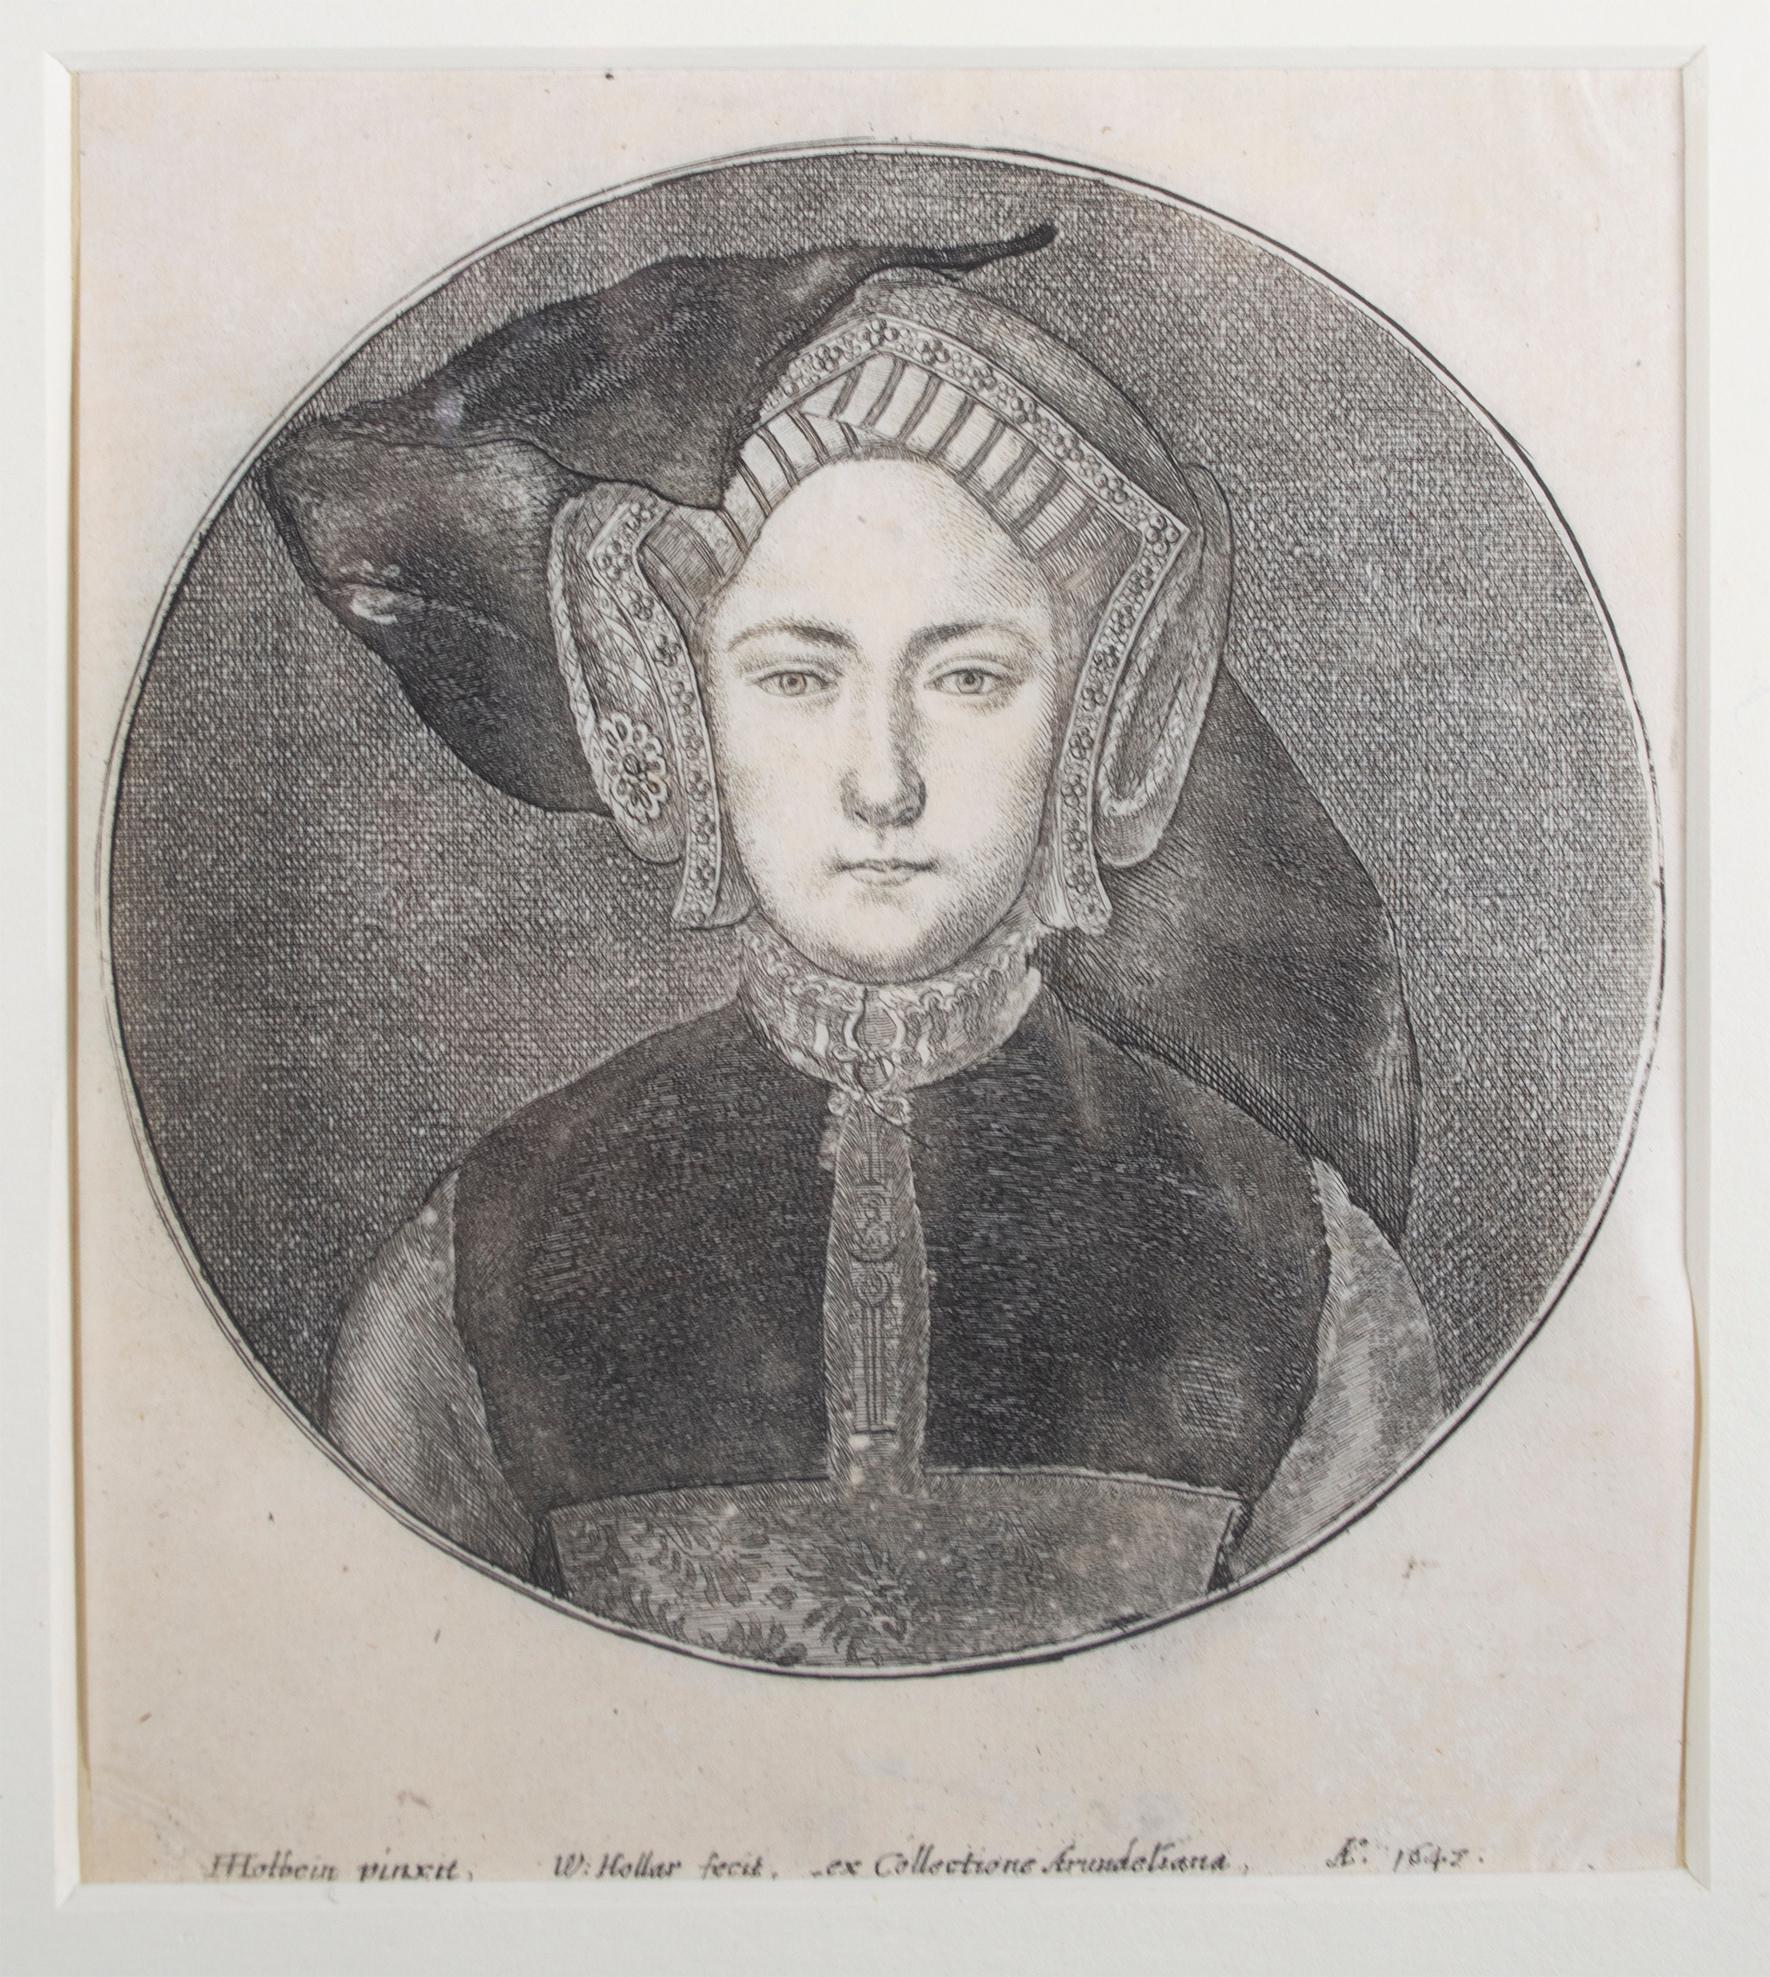 'Portrait of a Young Woman' original Hollar engraving after Hans Holbein - Print by Wenceslaus Hollar